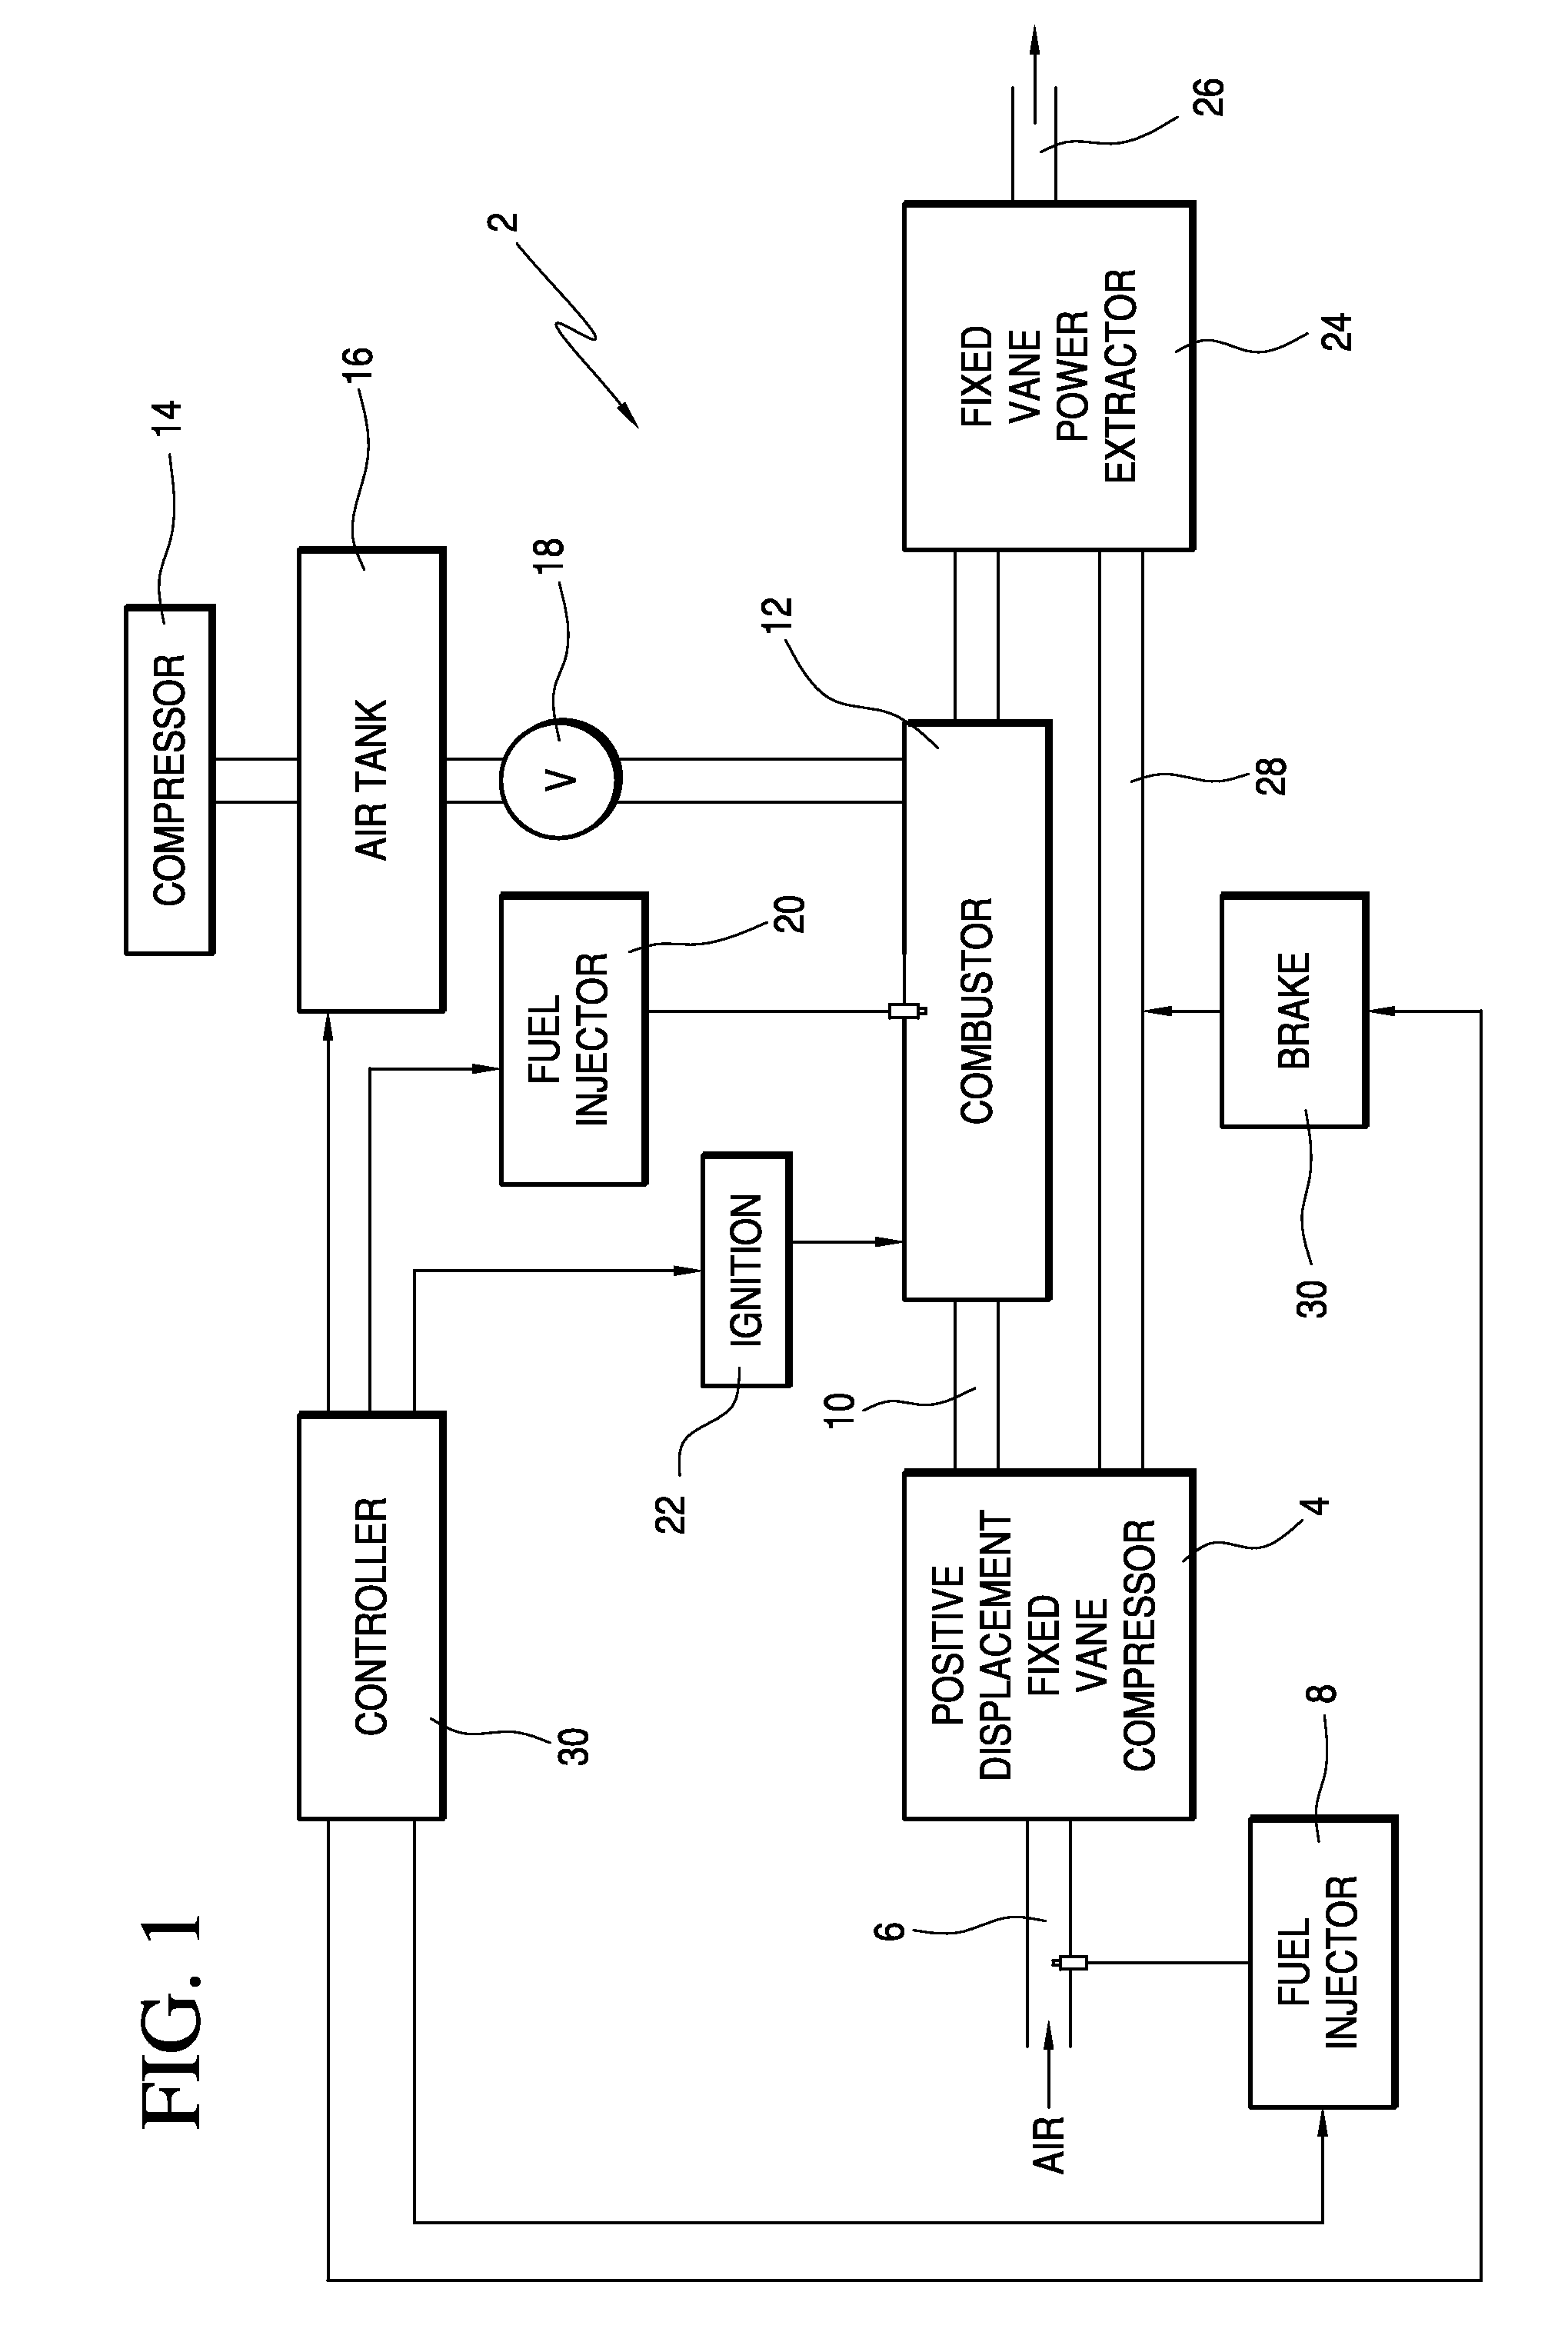 Positive displacement power extraction compensation device